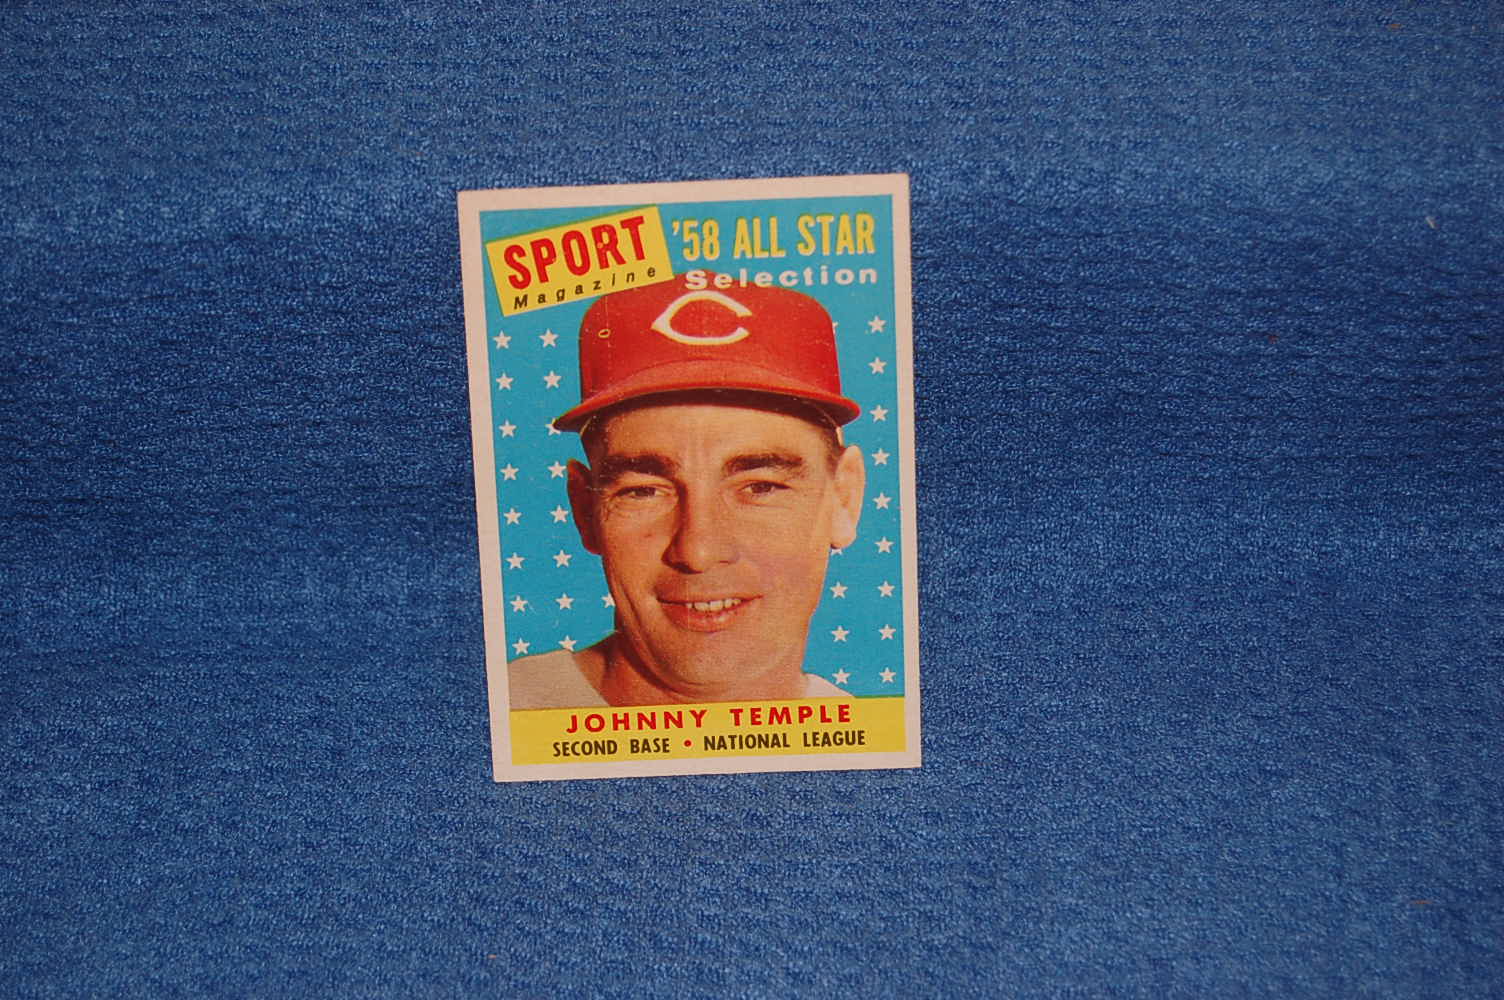 1958 Topps #478 Johnny Temple AS UER/Card says record vs American League/Temple was NL AS